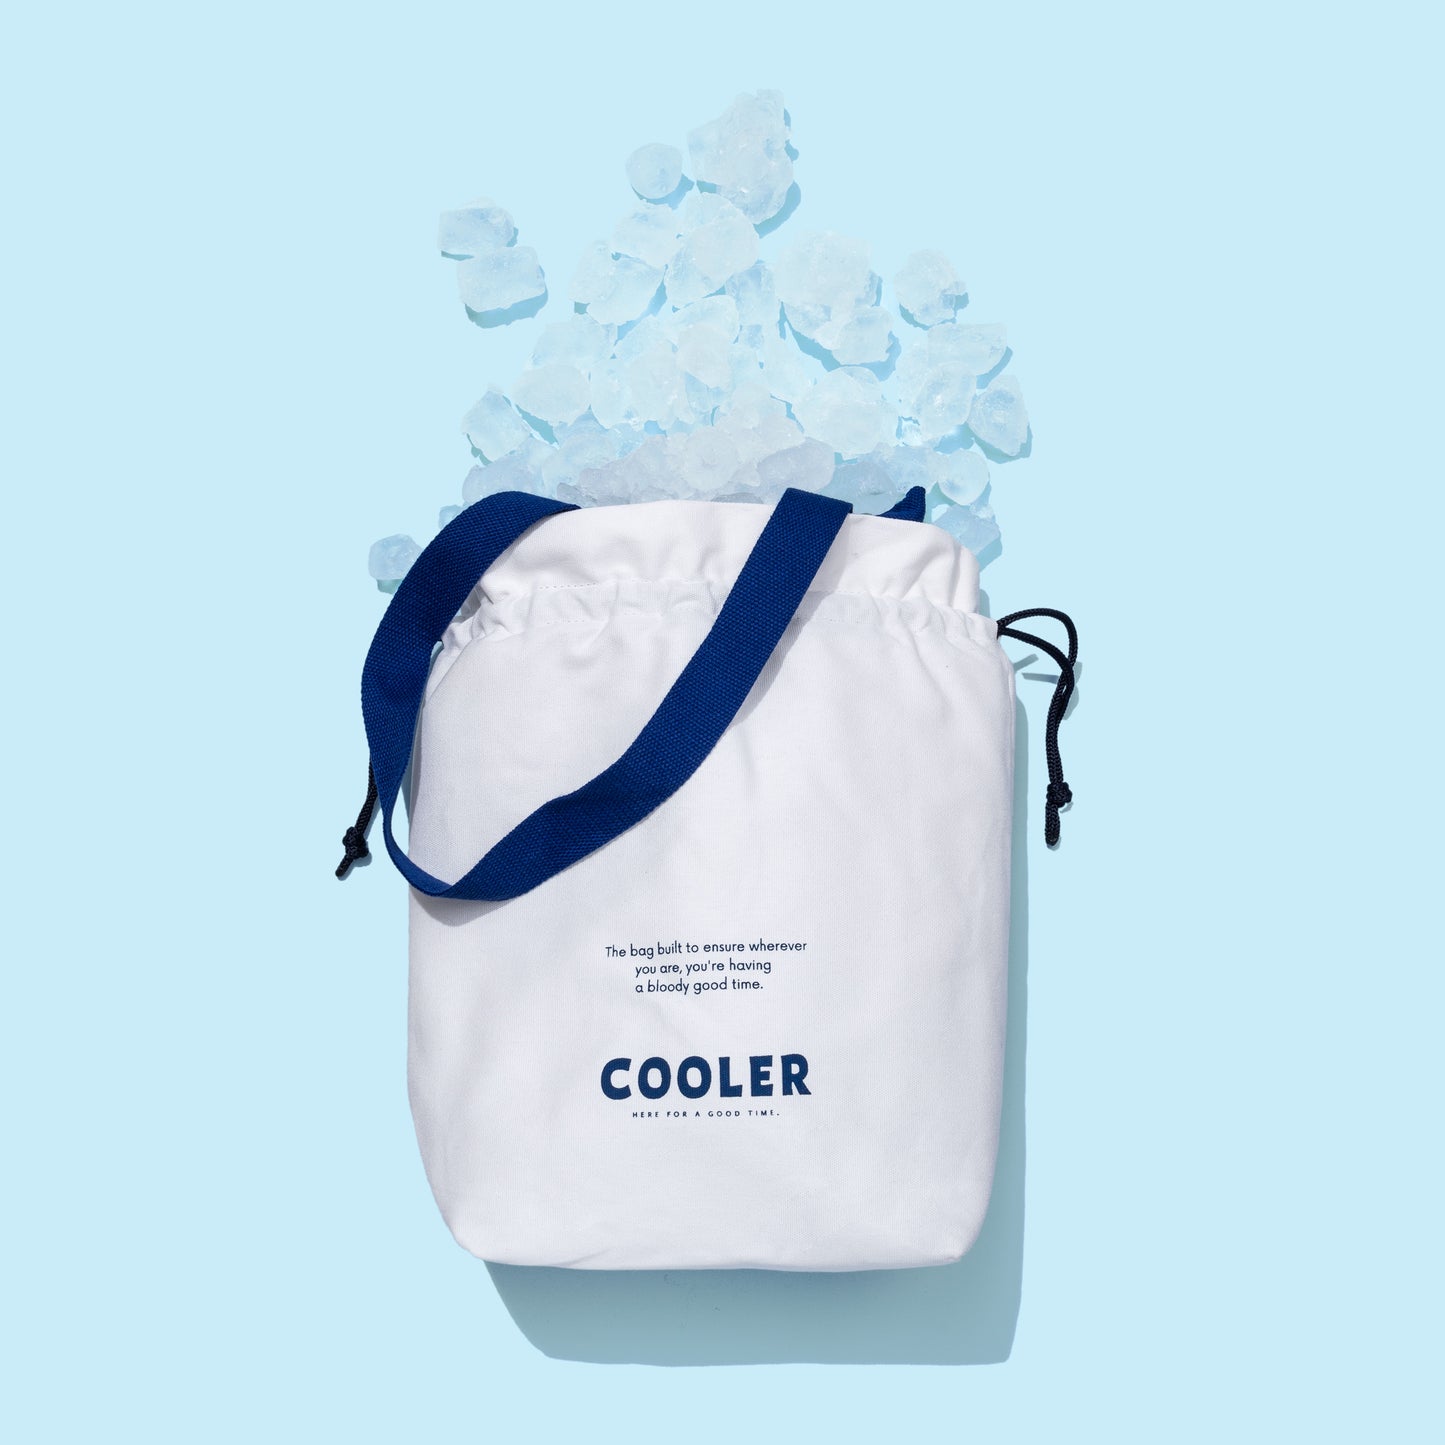 Don't Be A Prick Cooler - Coolers and Insulated Bags